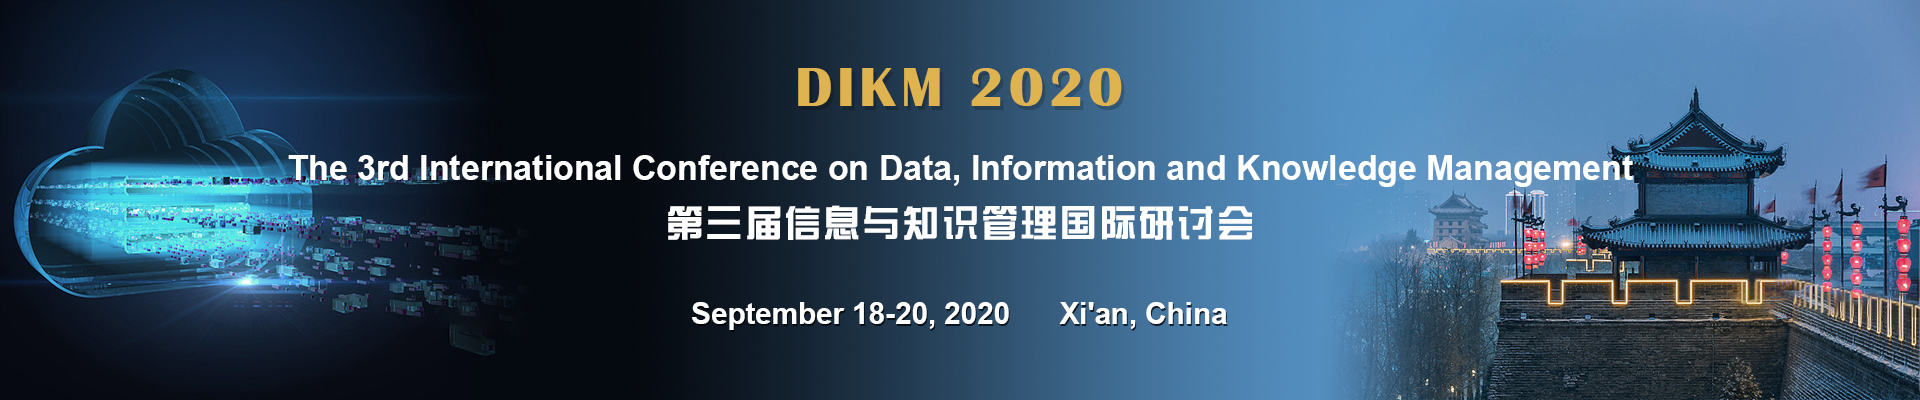 The 3rd International Conference on Data, Information and Knowledge Management (DIKM 2020), Xi'an, Shaanxi, China